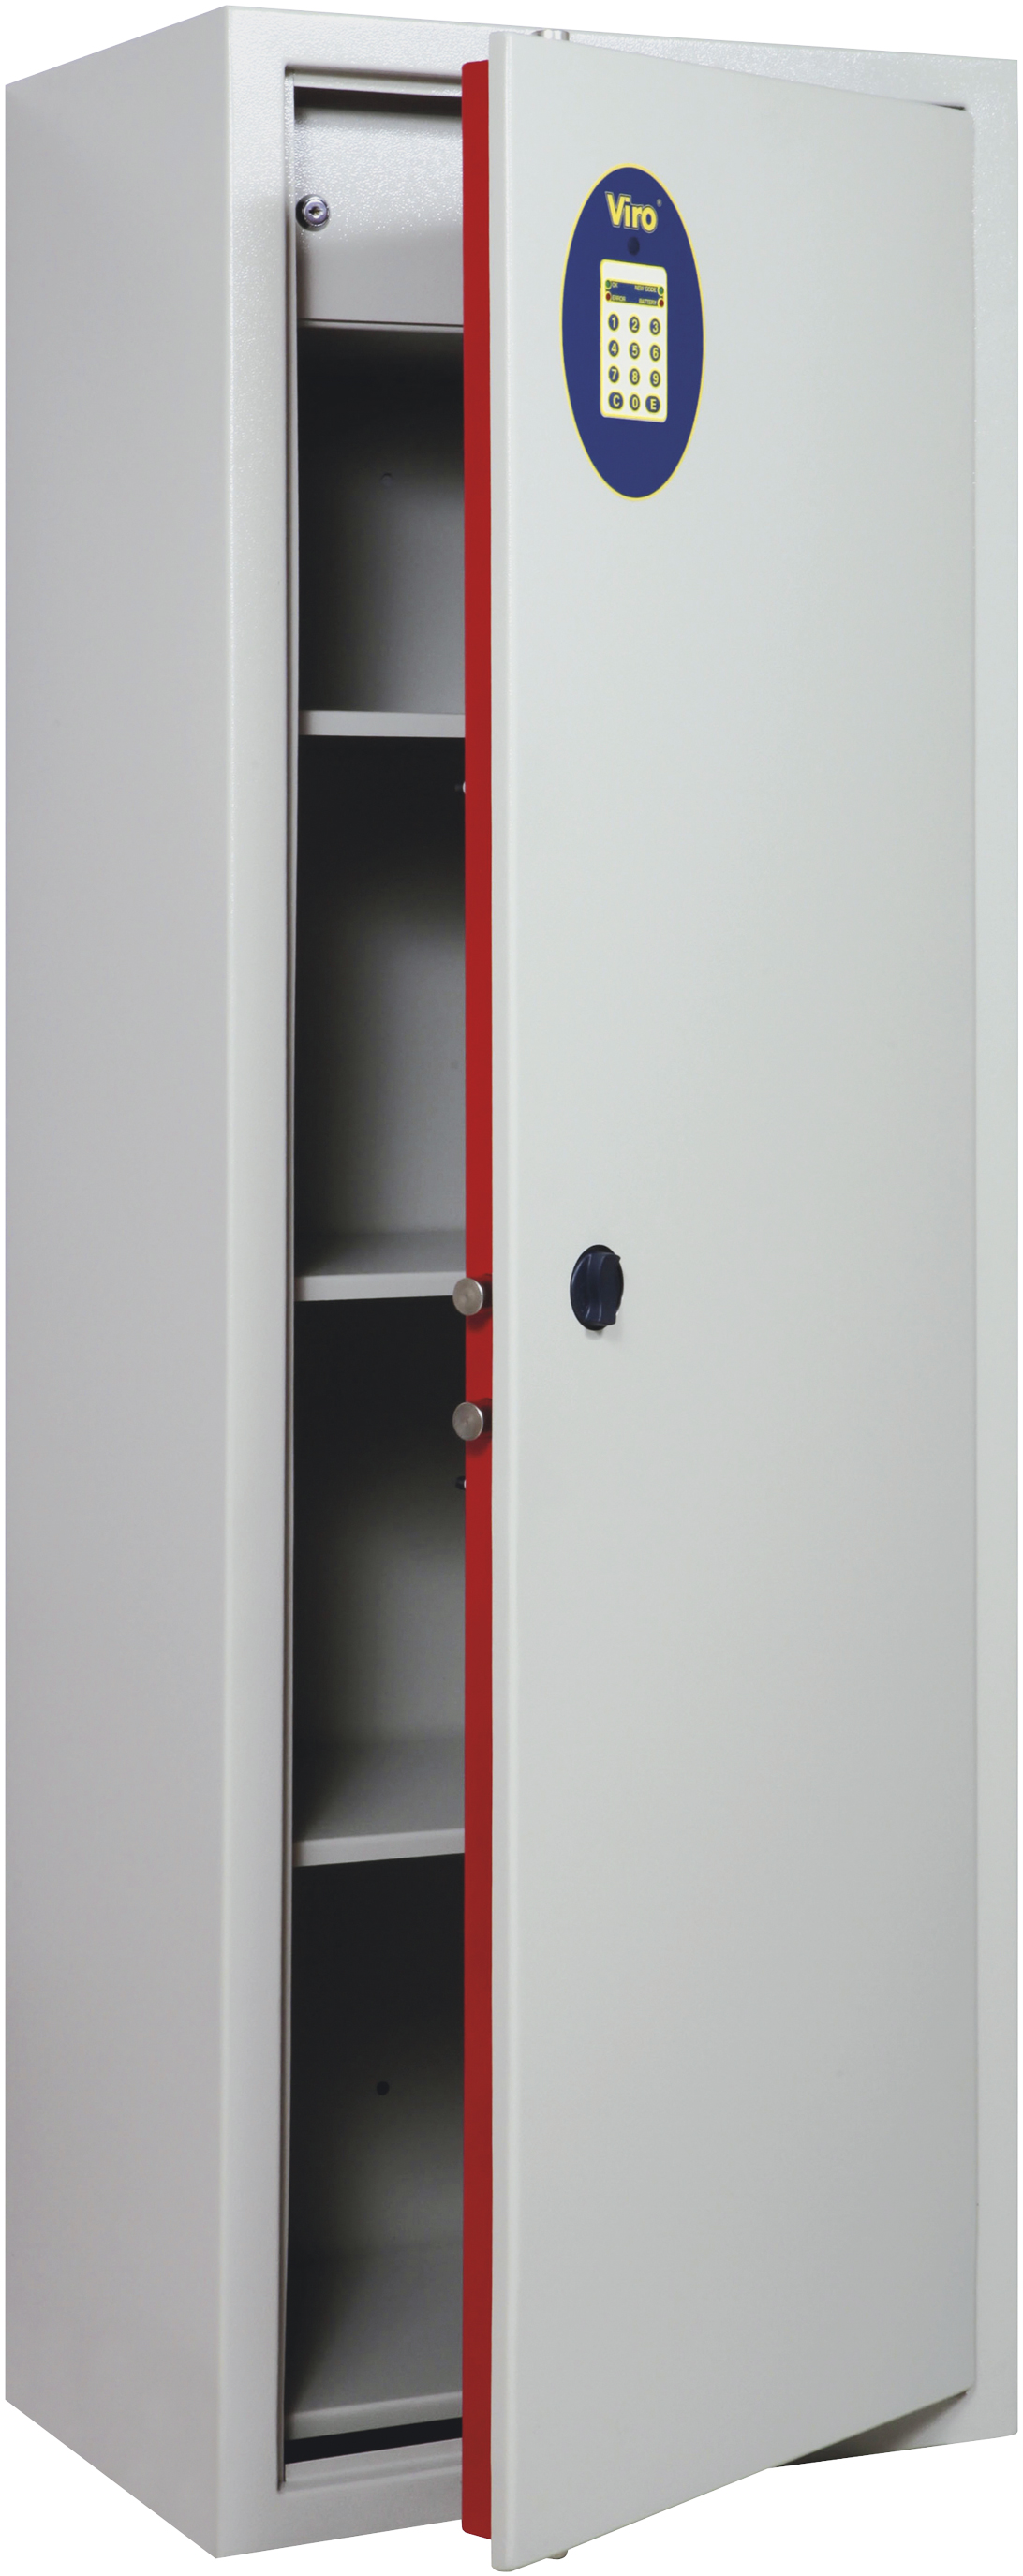 VIRO - with-electronic-combination-lock---file-cabinet